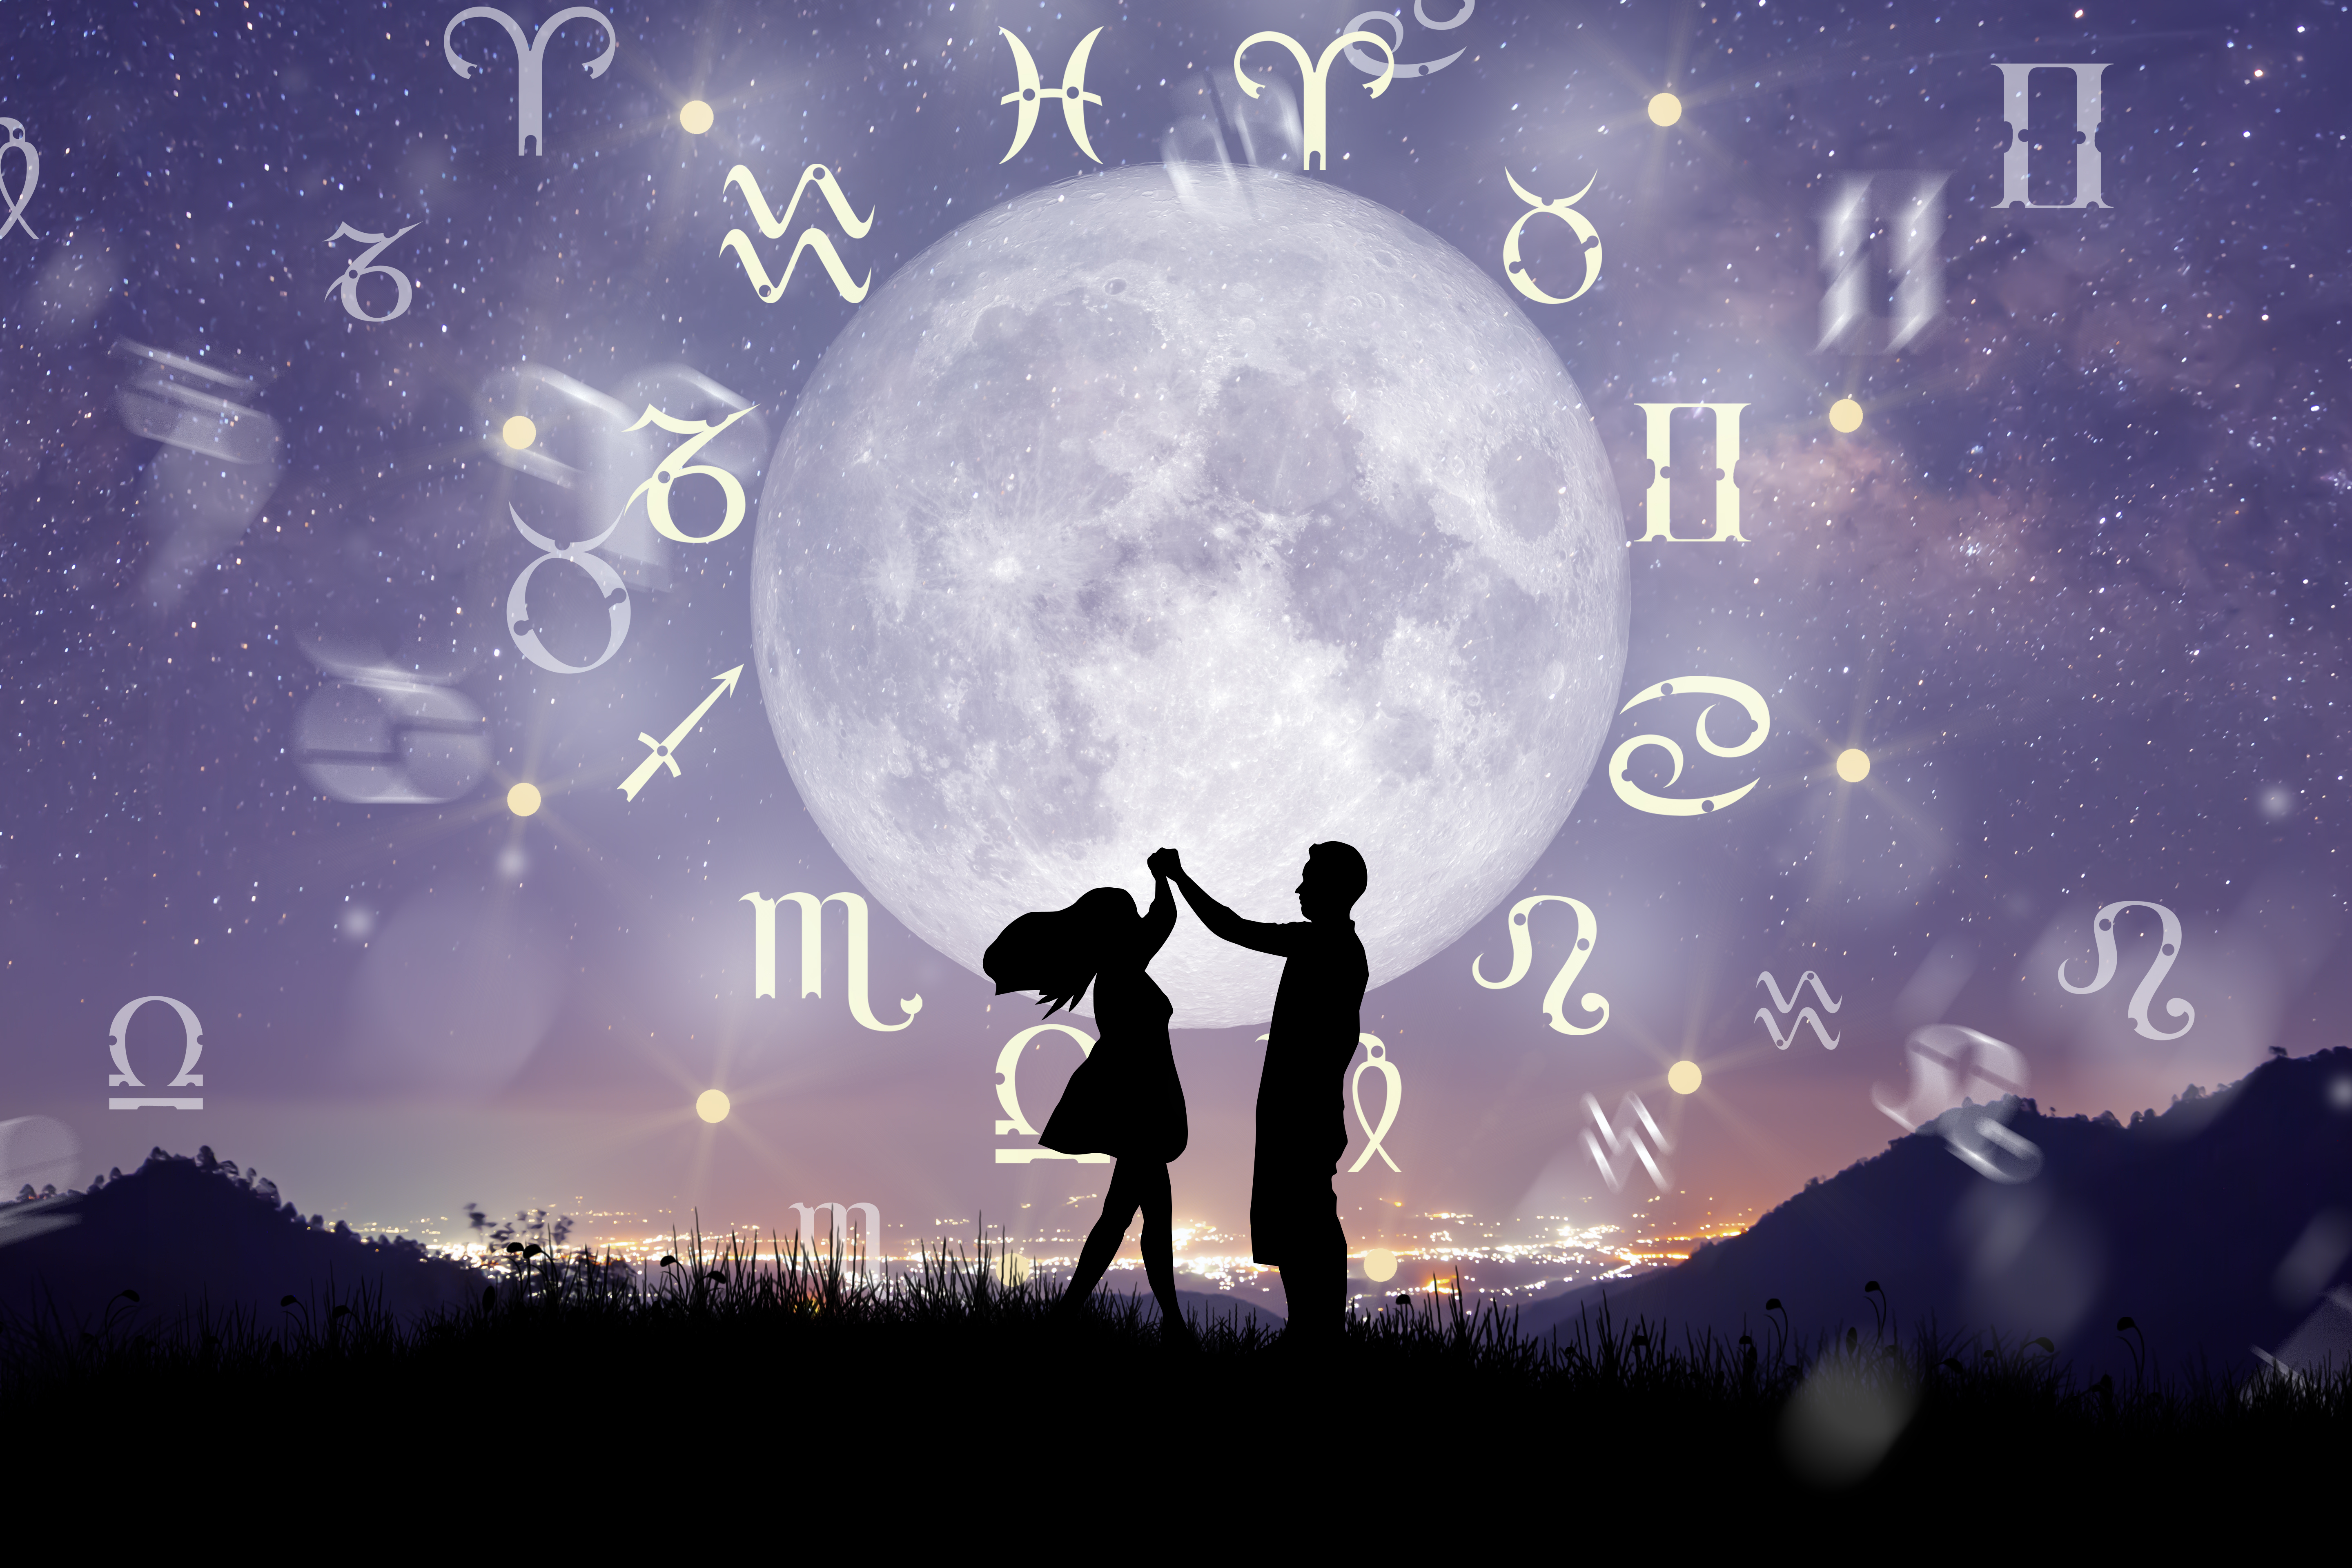 Astrological zodiac signs inside of horoscope circle with a couple dancing over the zodiac wheel, moon and milky way background